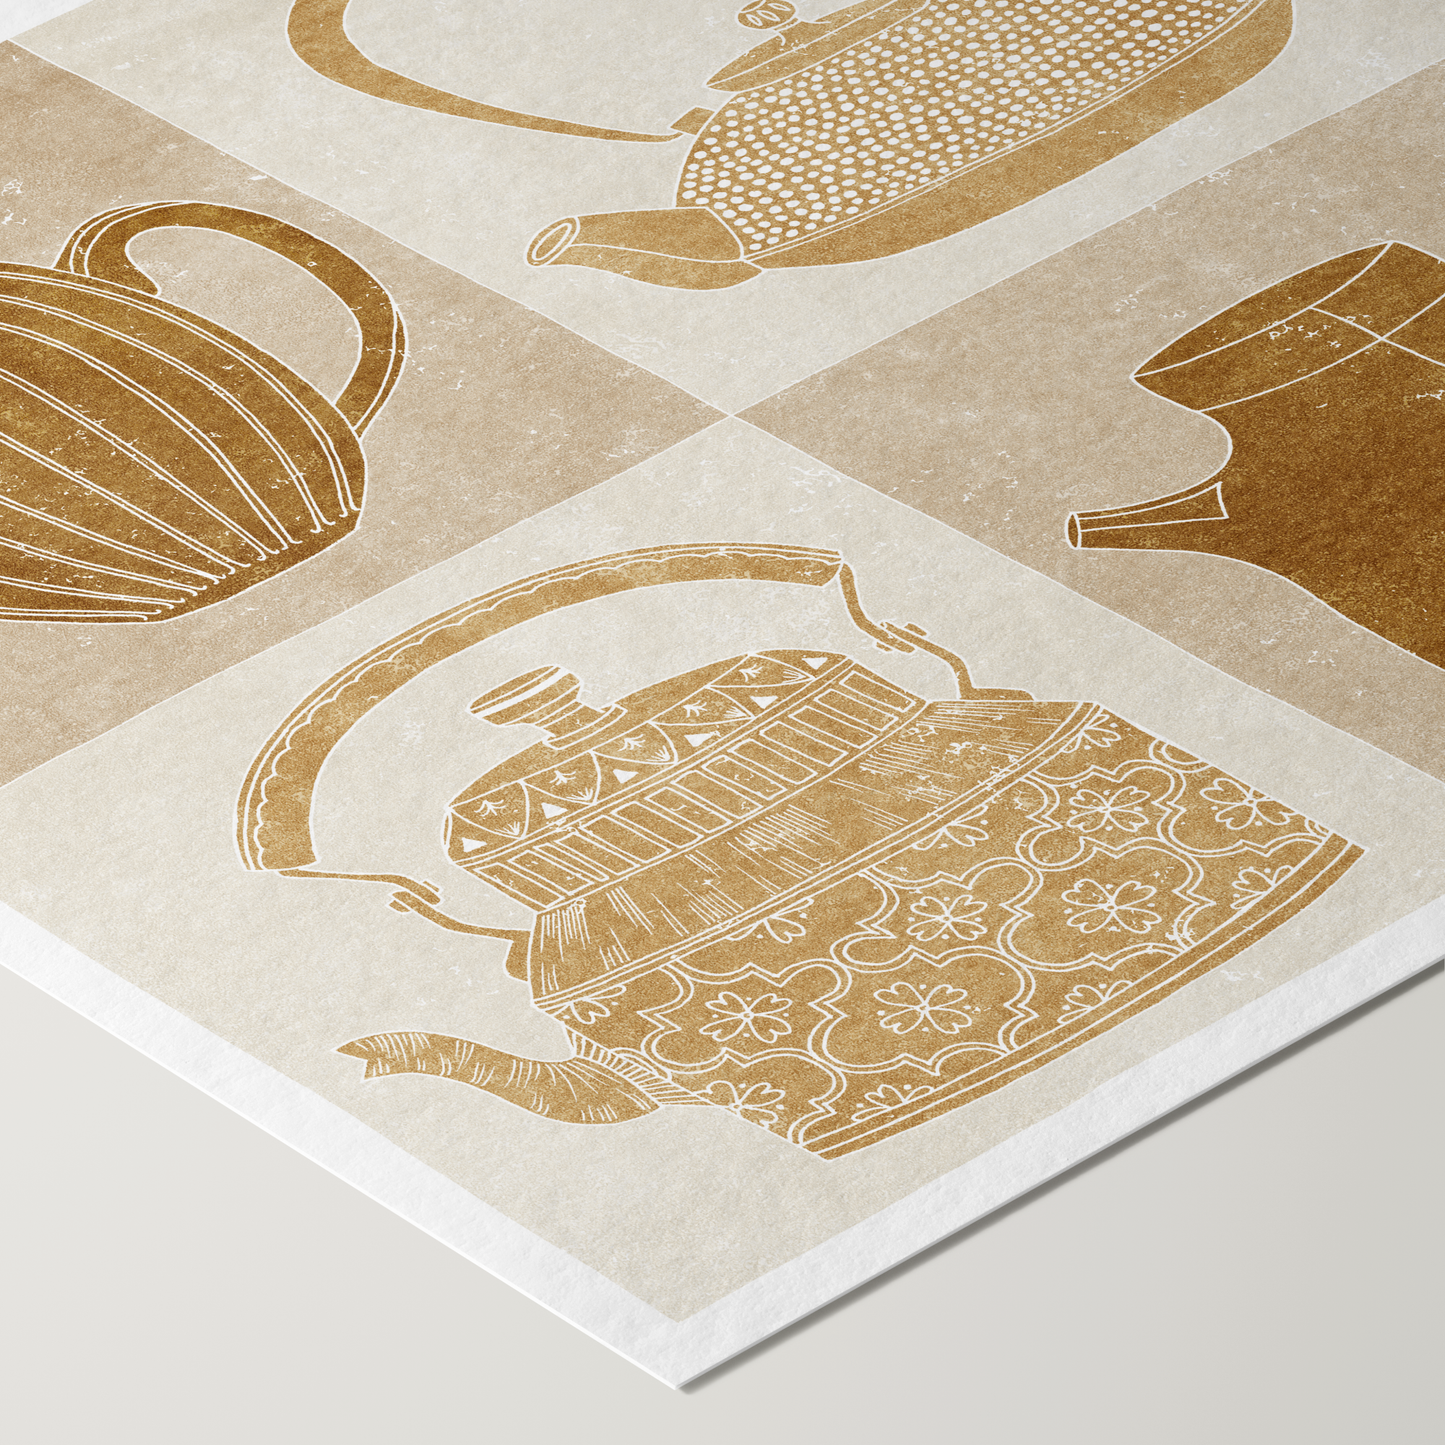 Home Decor Print - Giclee Print - Nature-inspired Prints - Teapots - Framed - Linocut Effect Illustration - Ochre = Hahnemühle German Etching Paper - Close Up